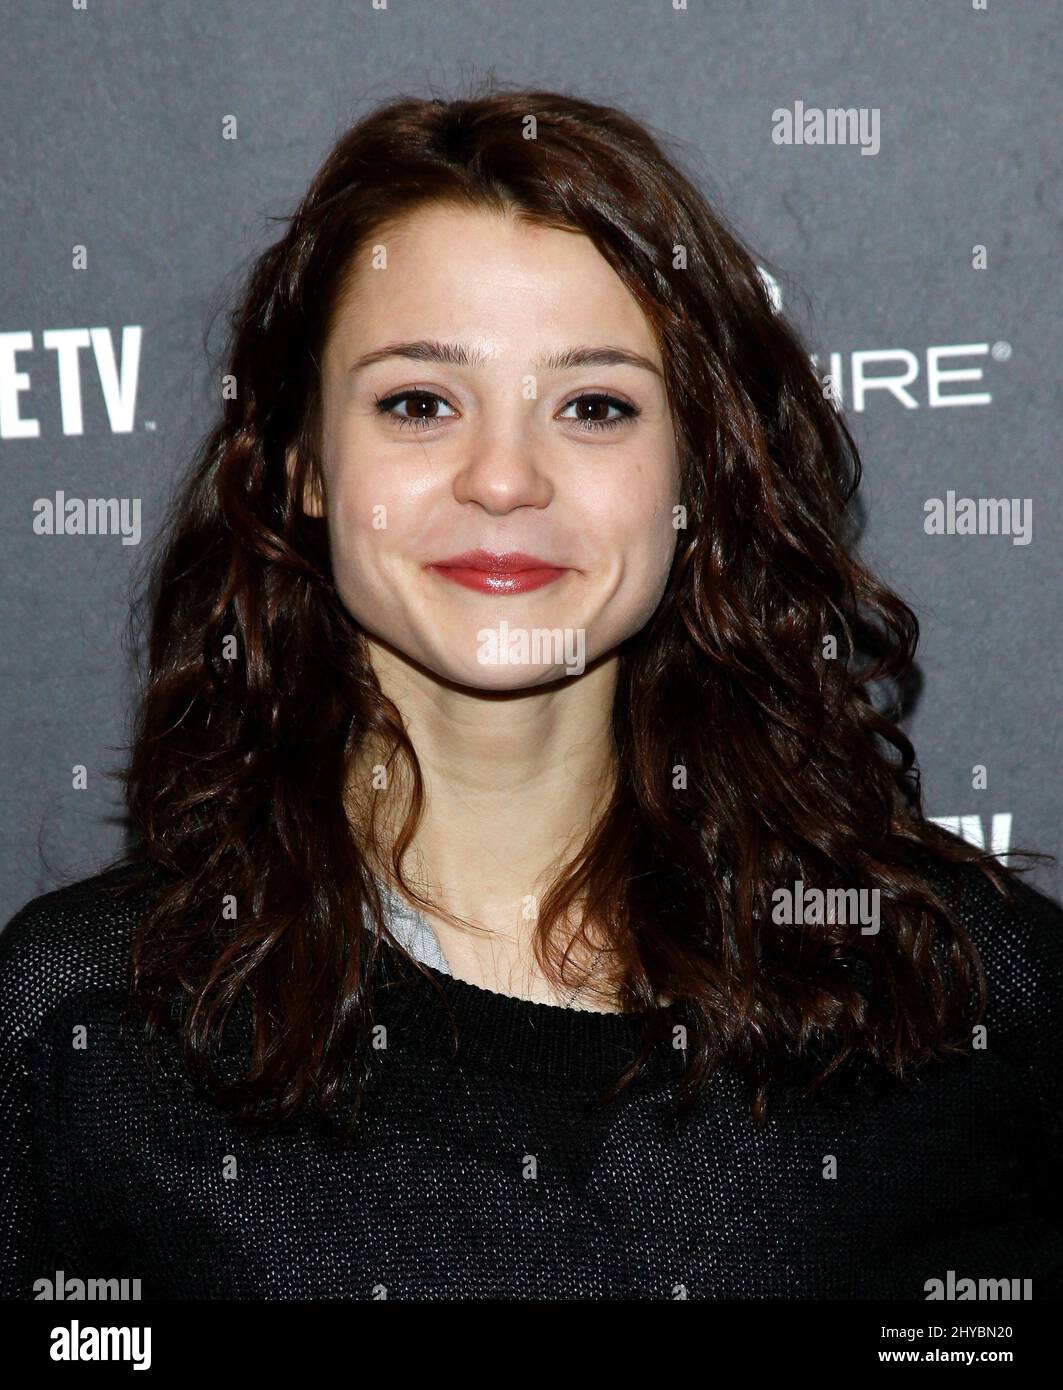 Kathryn Prescott attends the 'To The Bone' premiere at Sundance Film Festival 2017 held at the Eccles Theatre Stock Photo